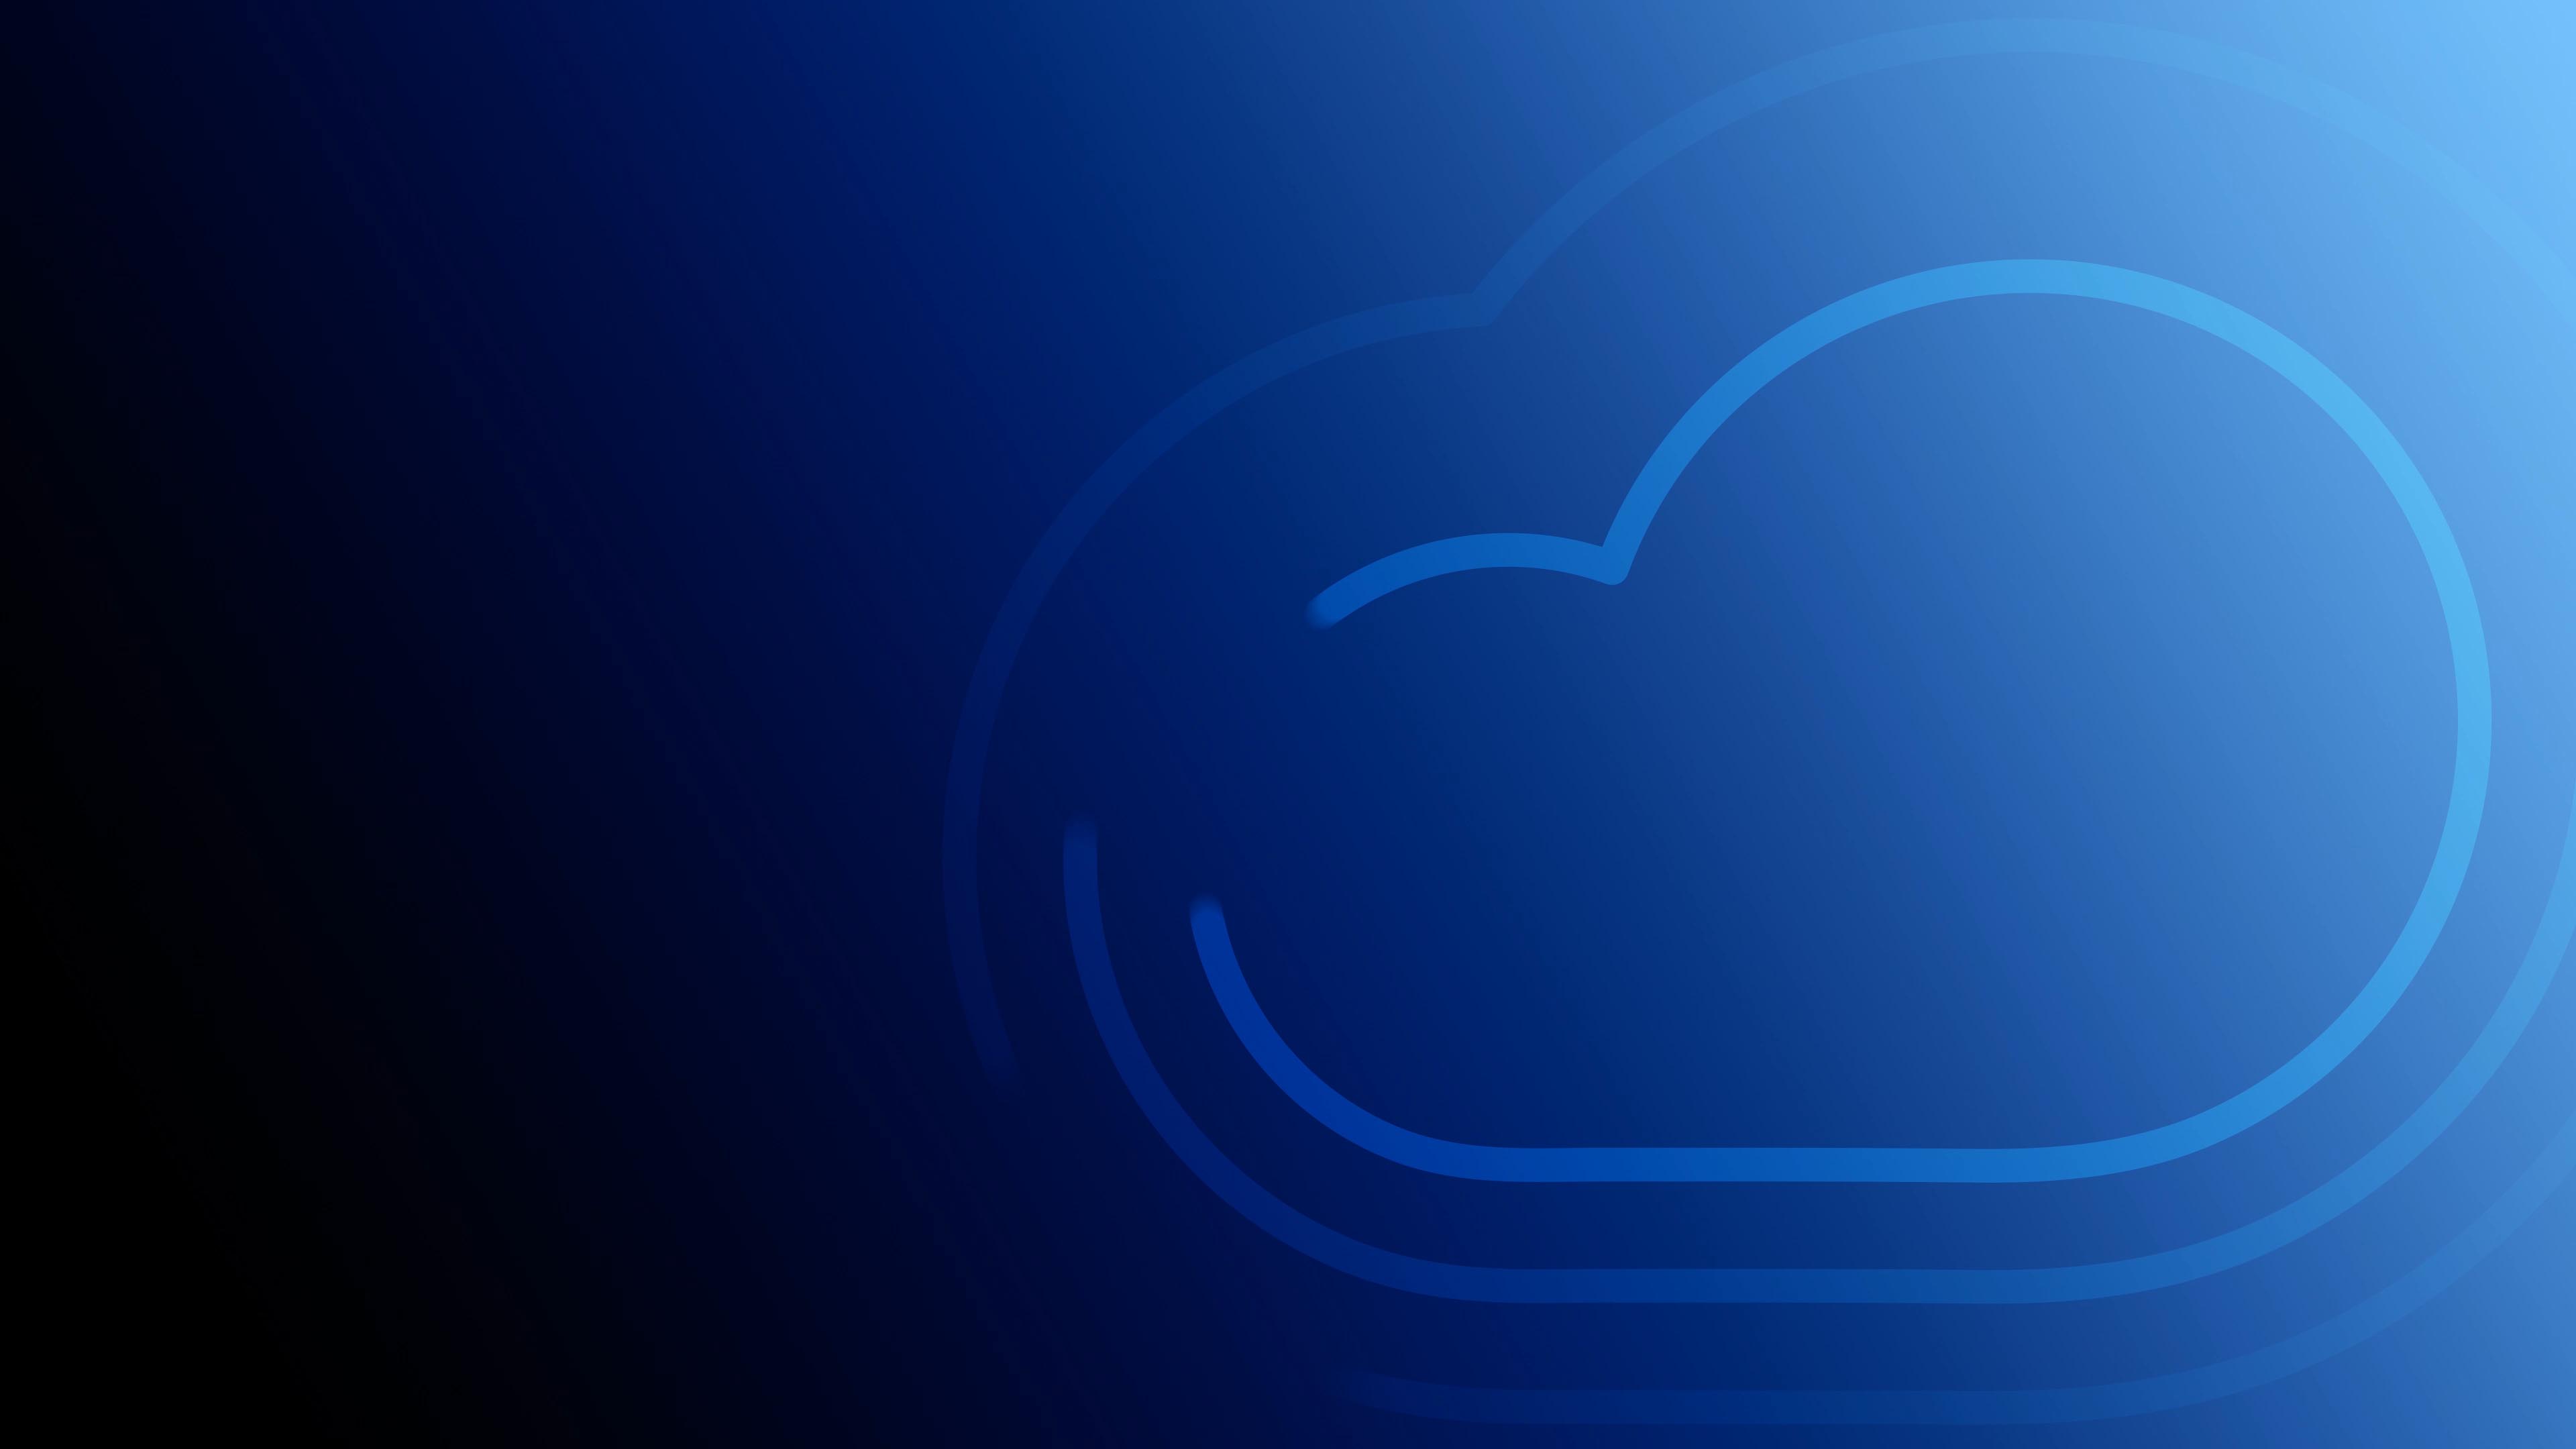 Animated outlines of a cloud on a blue gradient background